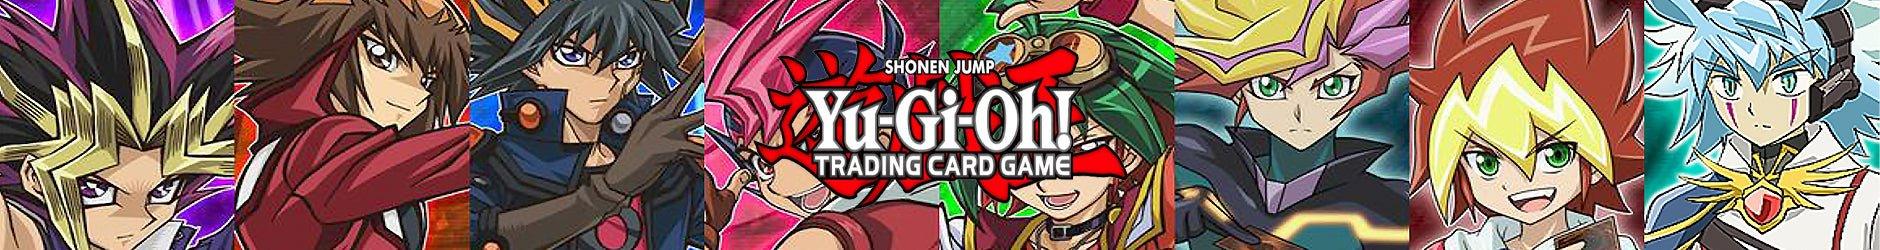 Yu-Gi-Oh! Latest Releases - Romulus Games